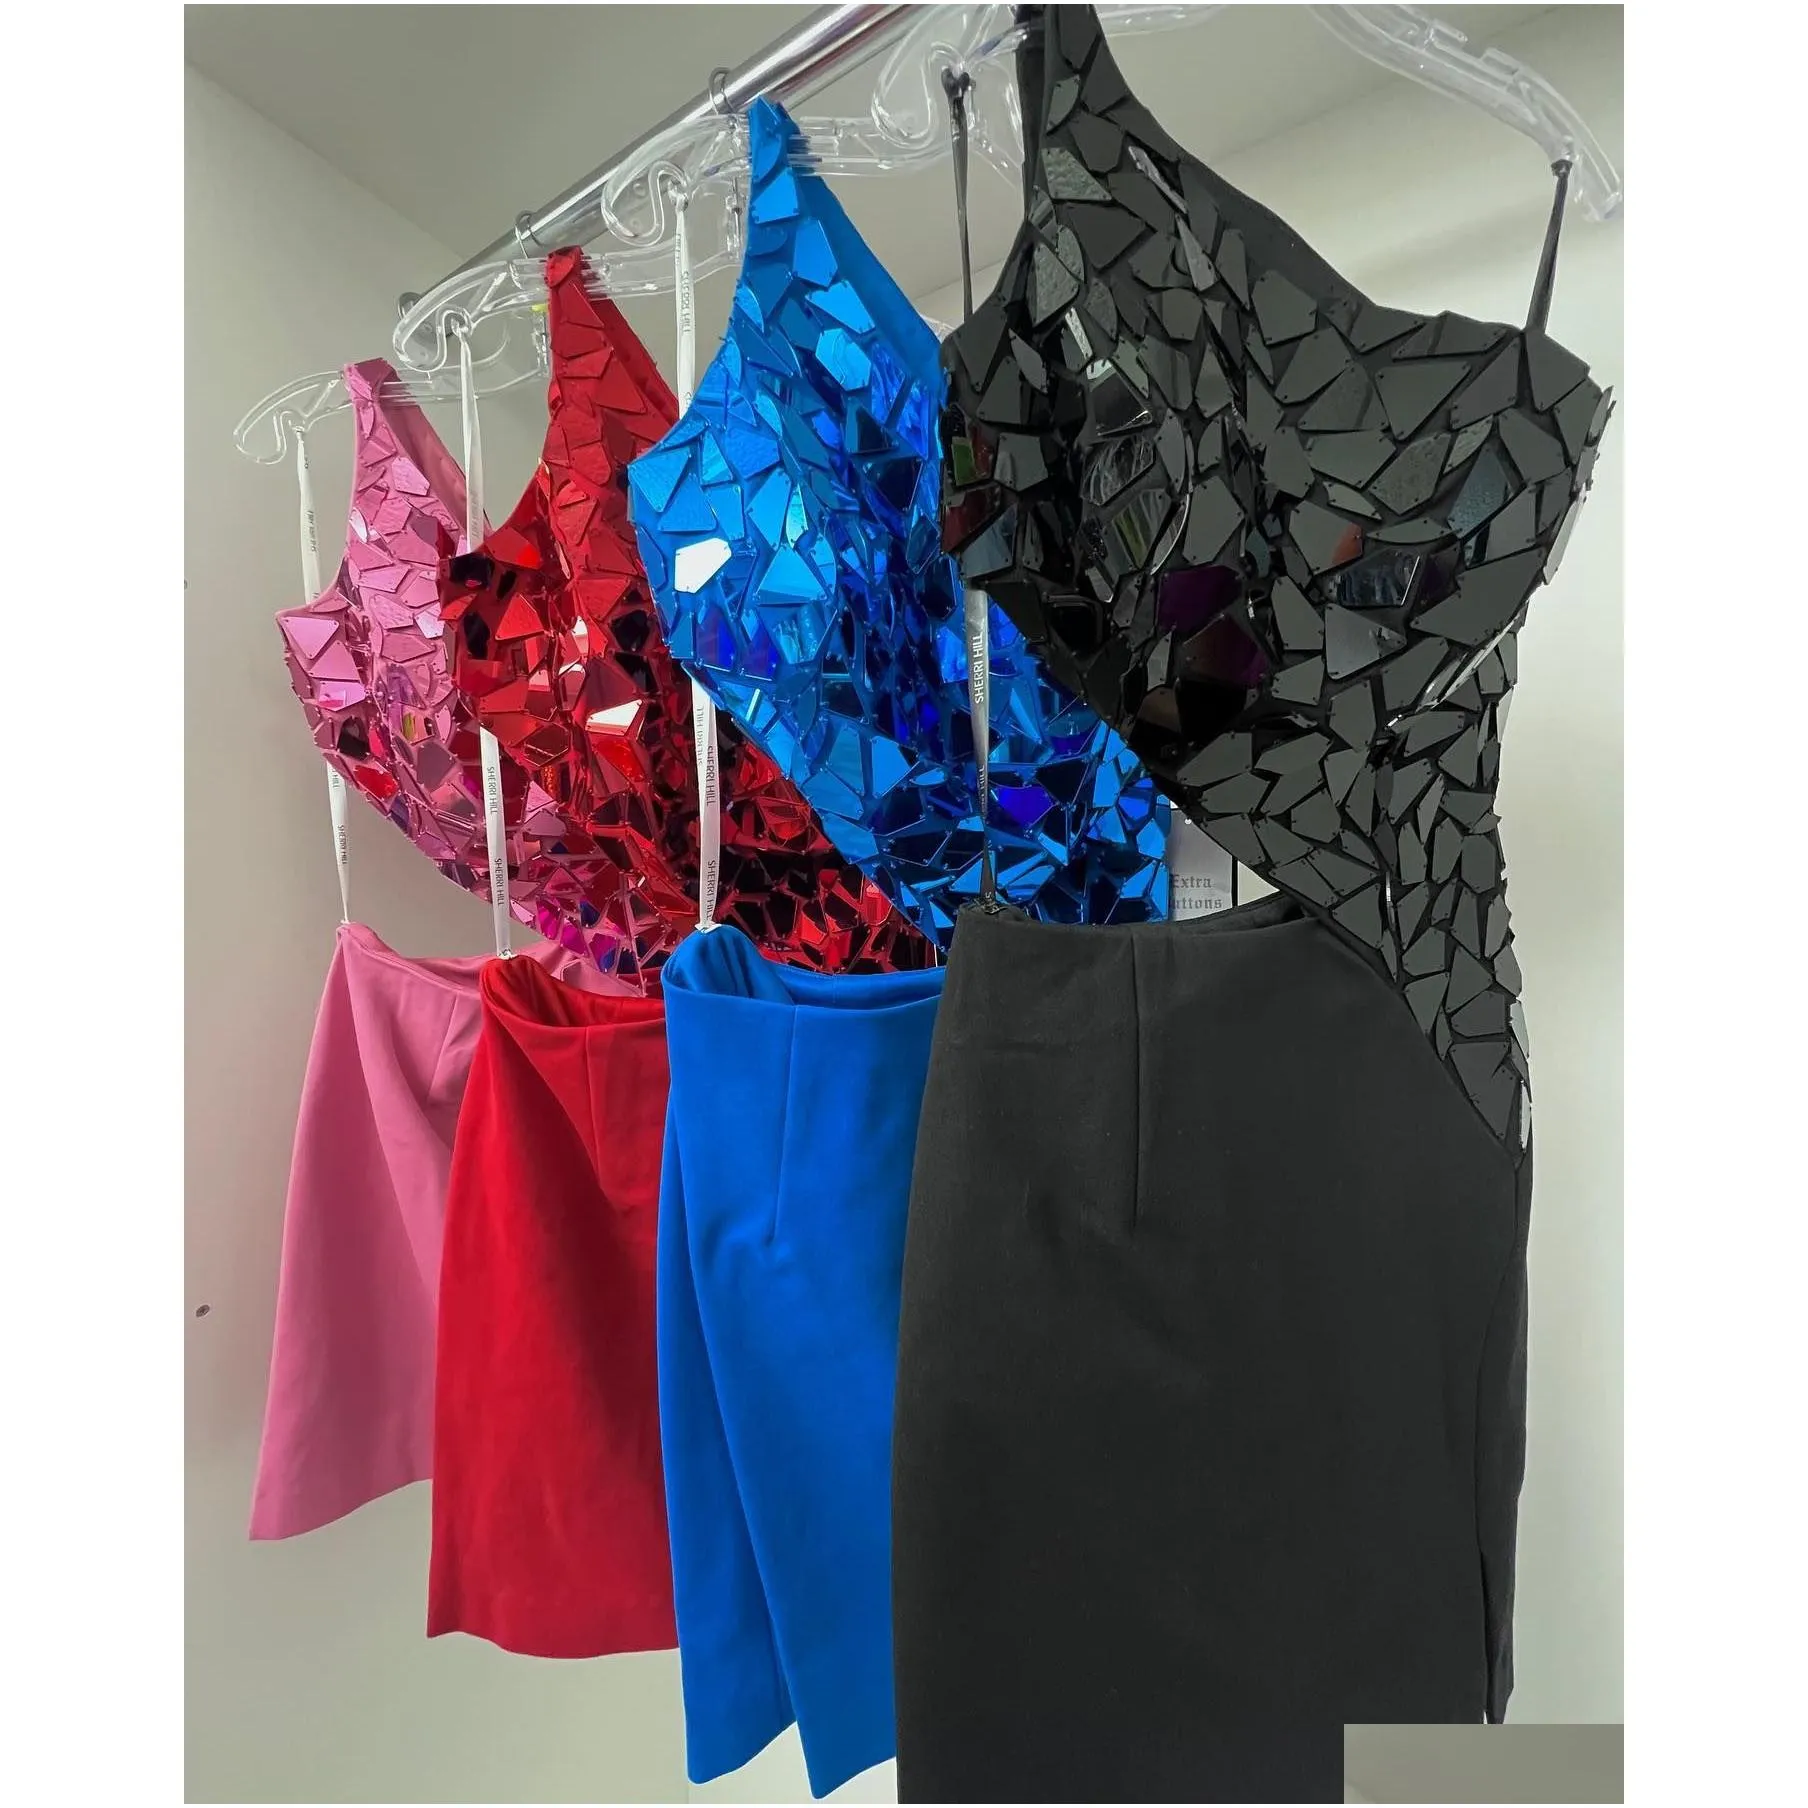 Mirror Hoco Dress 2023 Glass Cut-Out Lady Formal Event Cocktail Party Homecoming Pageant Short Prom Dance Gown Black Peacocks Pink Red Sheath One-Shoulder 2k23